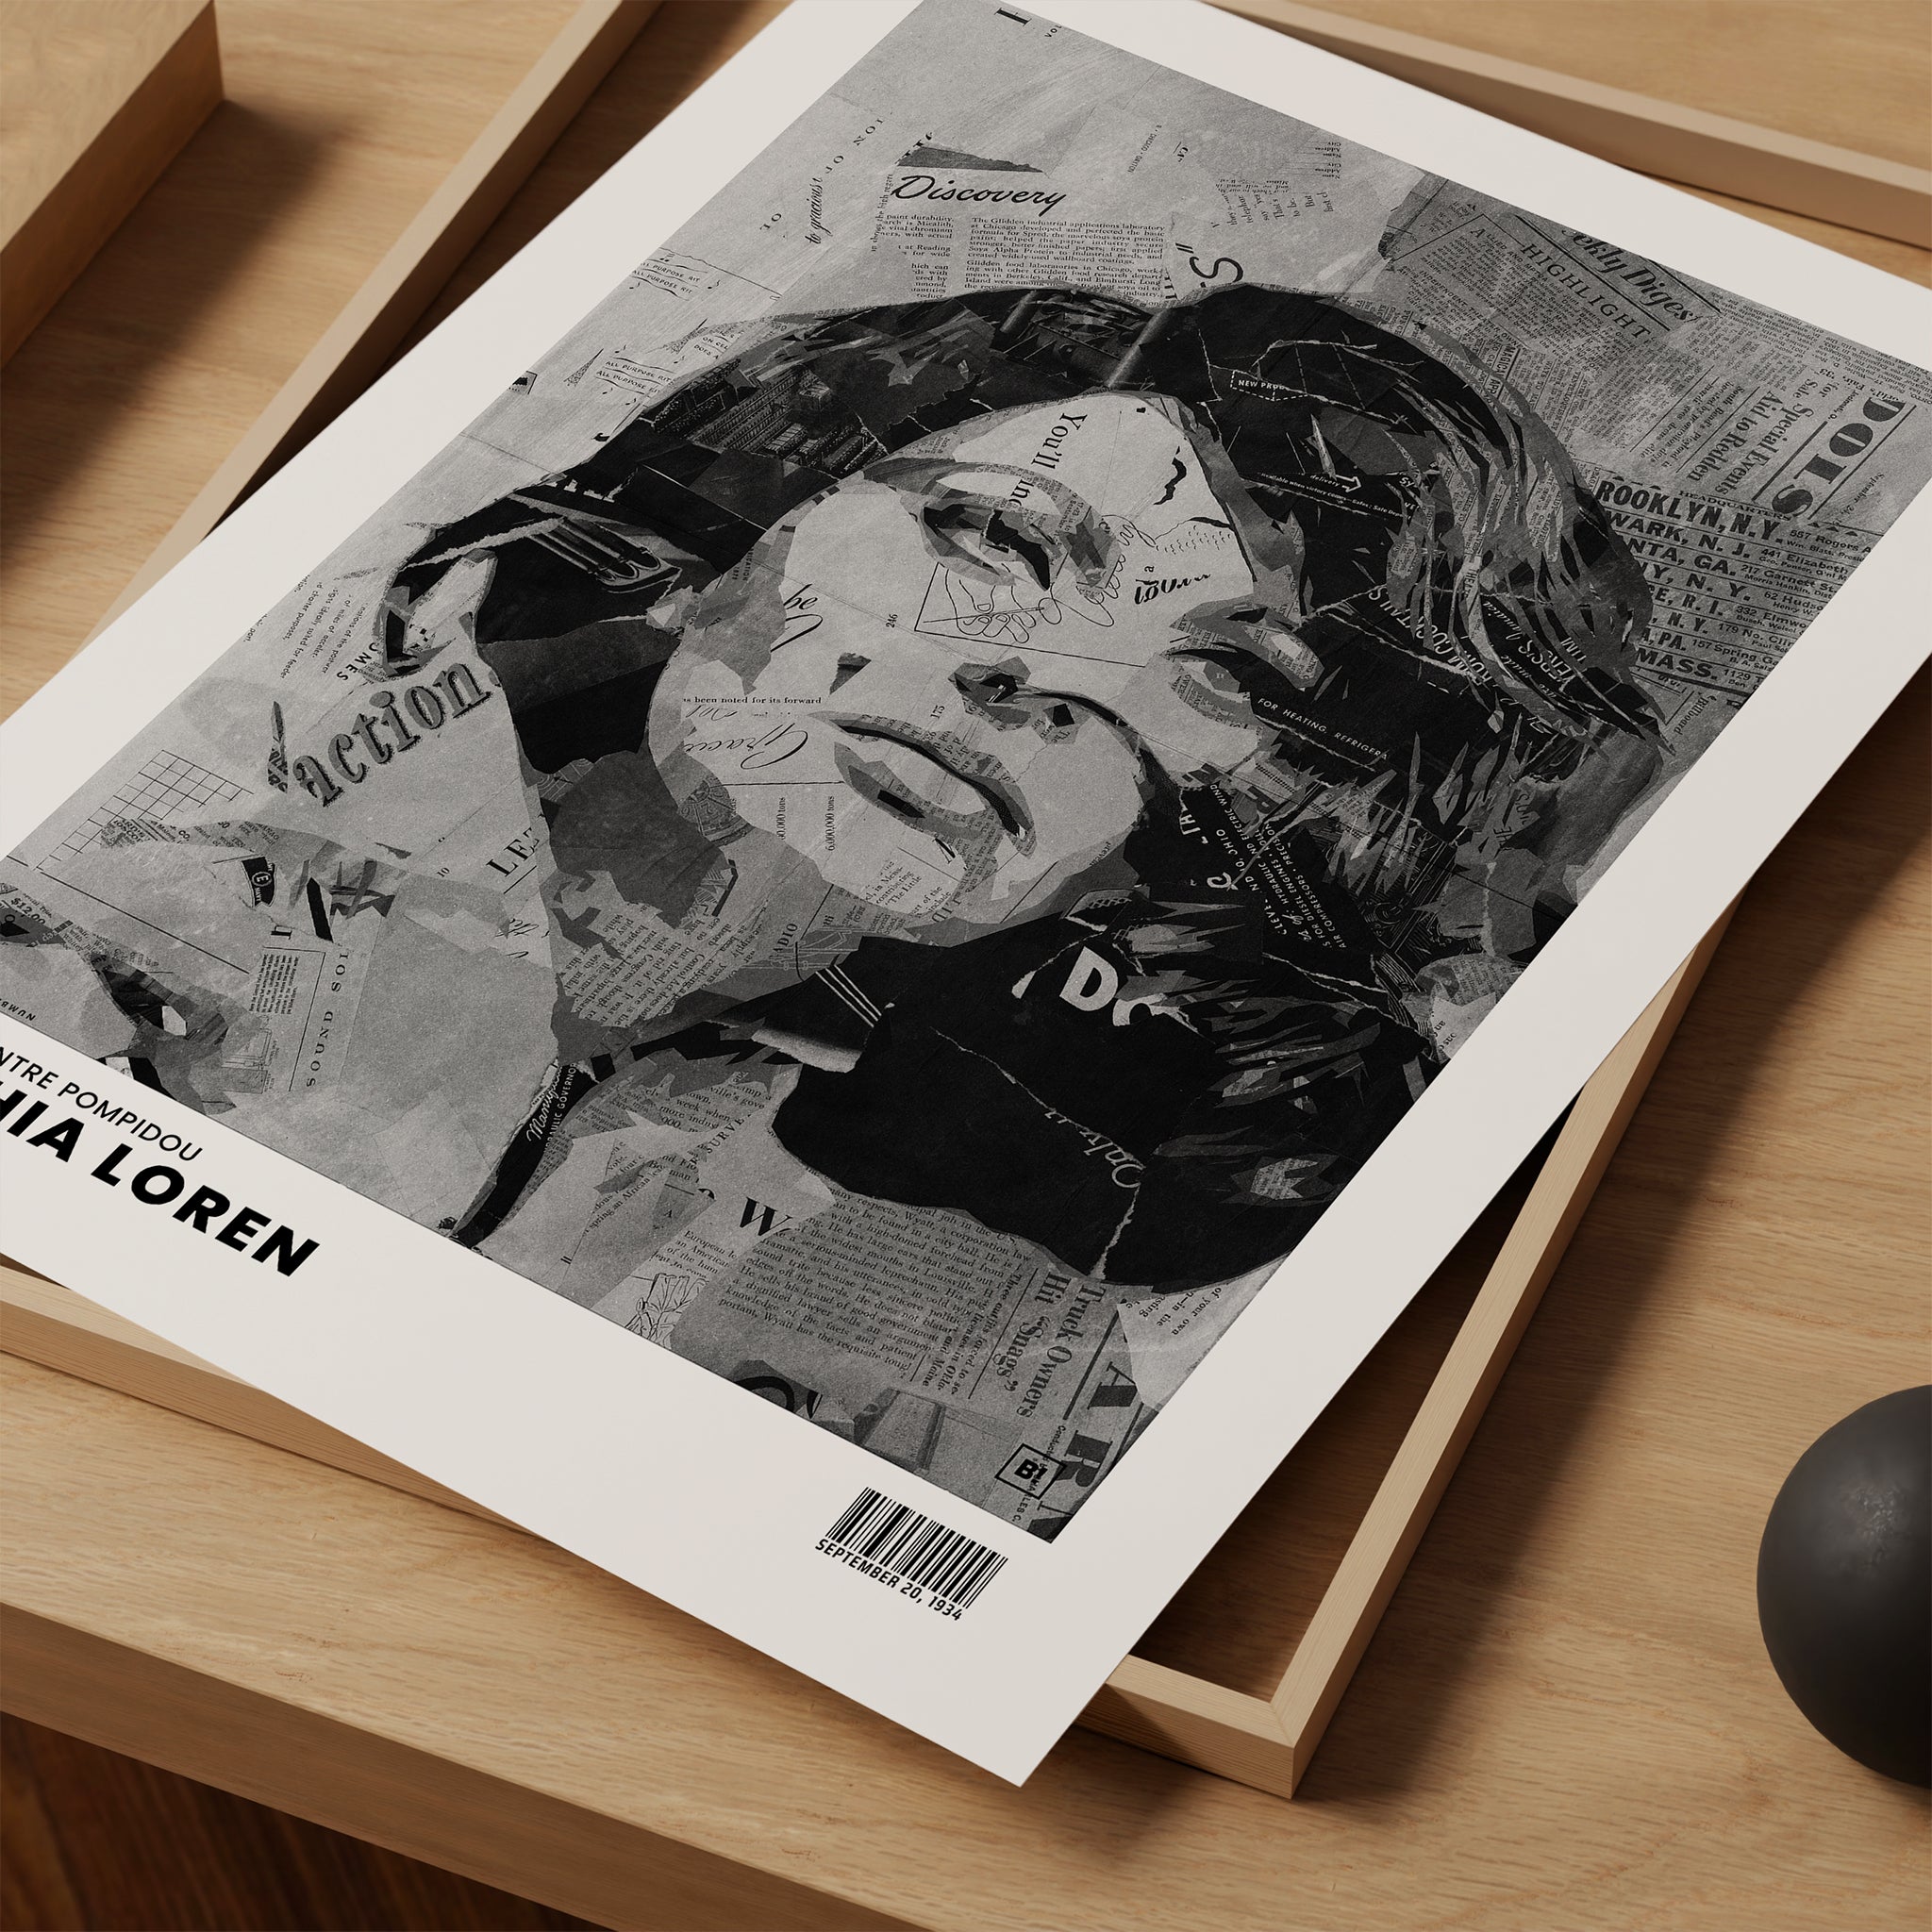 Be inspired by Iconic Sophia Loren Paris Centre Pompidou Exhibition Art Print. The artwork is presented as a print close up that captures its timeless beauty in every detail.